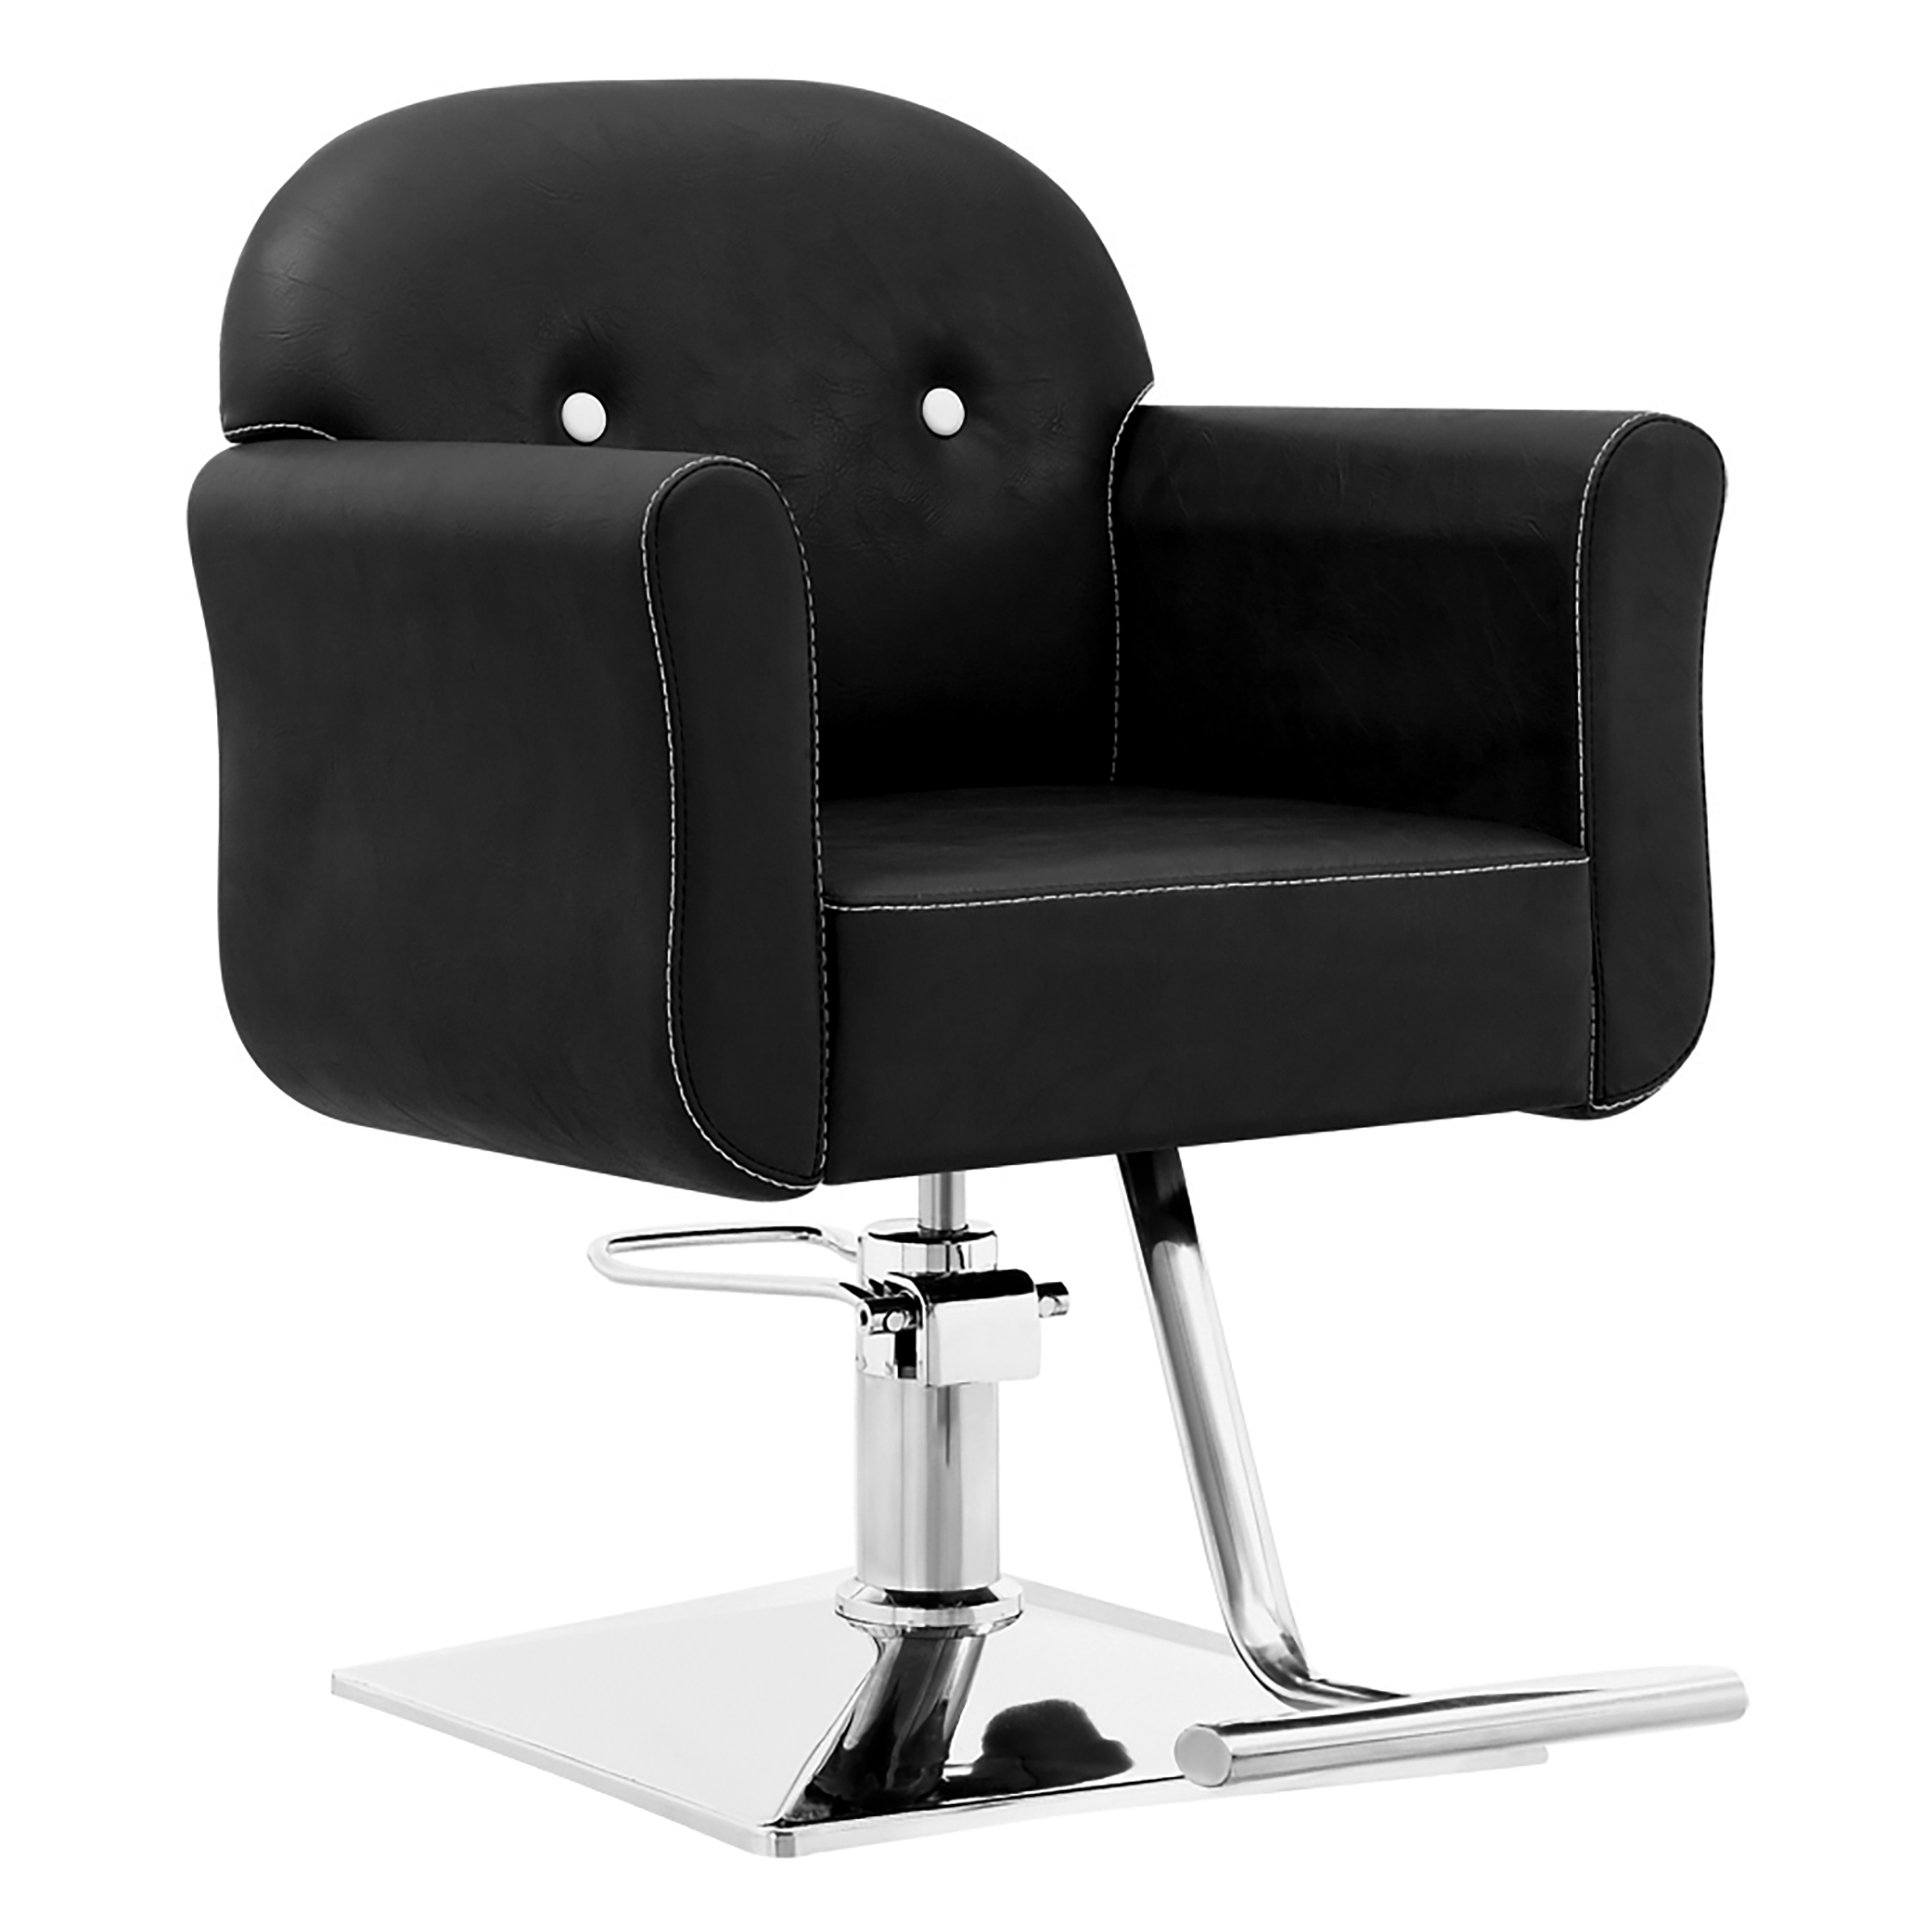 M-290 STYLING CHAIRS SSW 